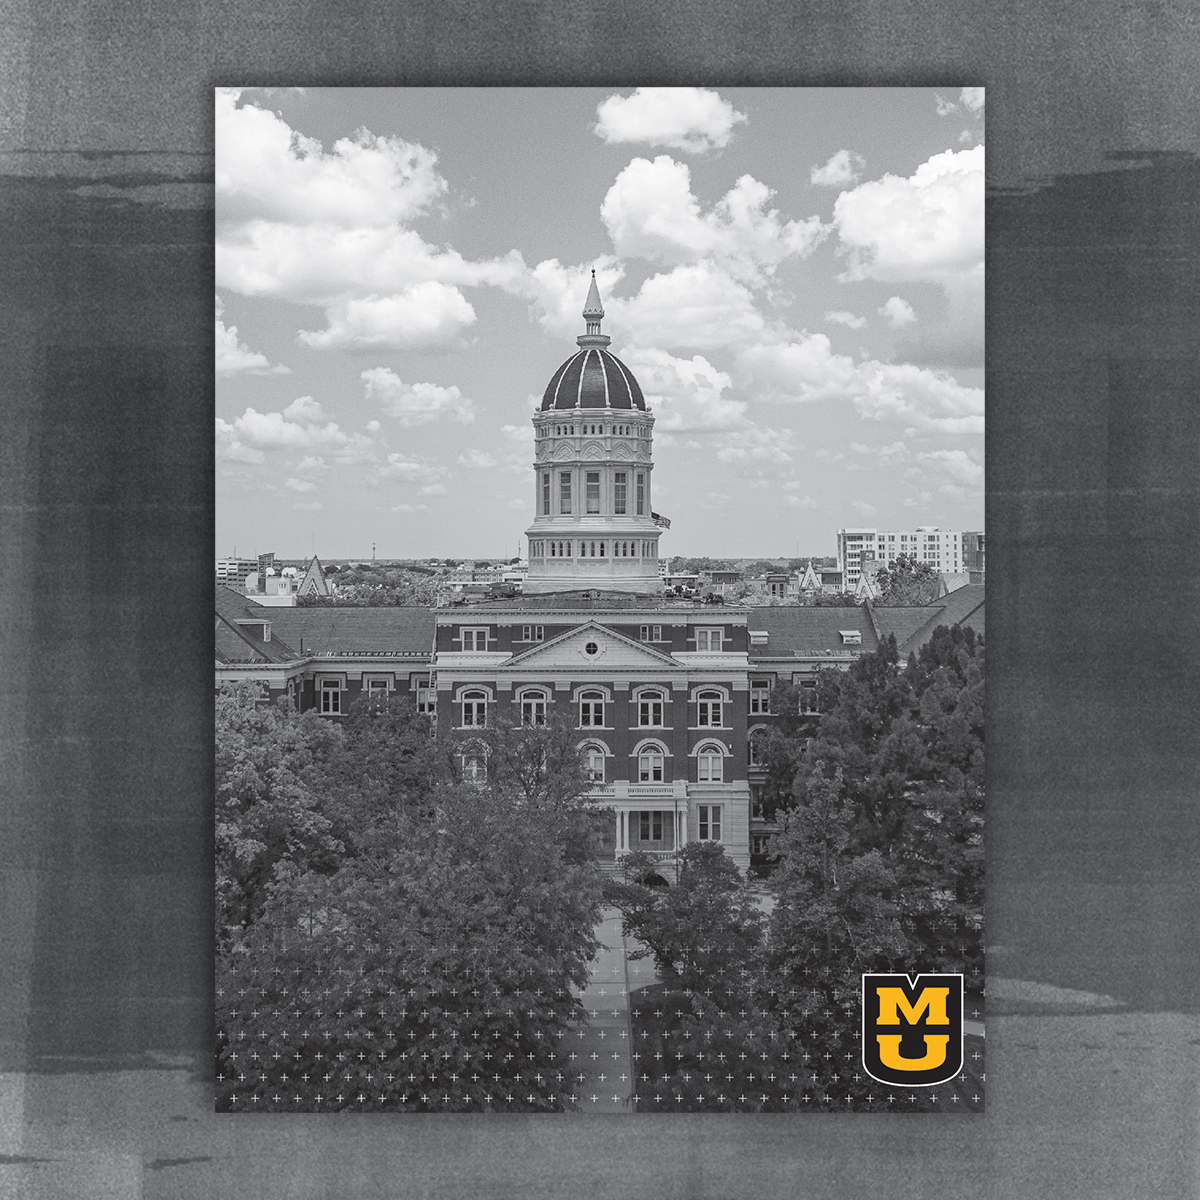 9x12 pocket folder design. Black and white image of Jesse hall and a stacked MU logo in the corner over a gradient plus pattern